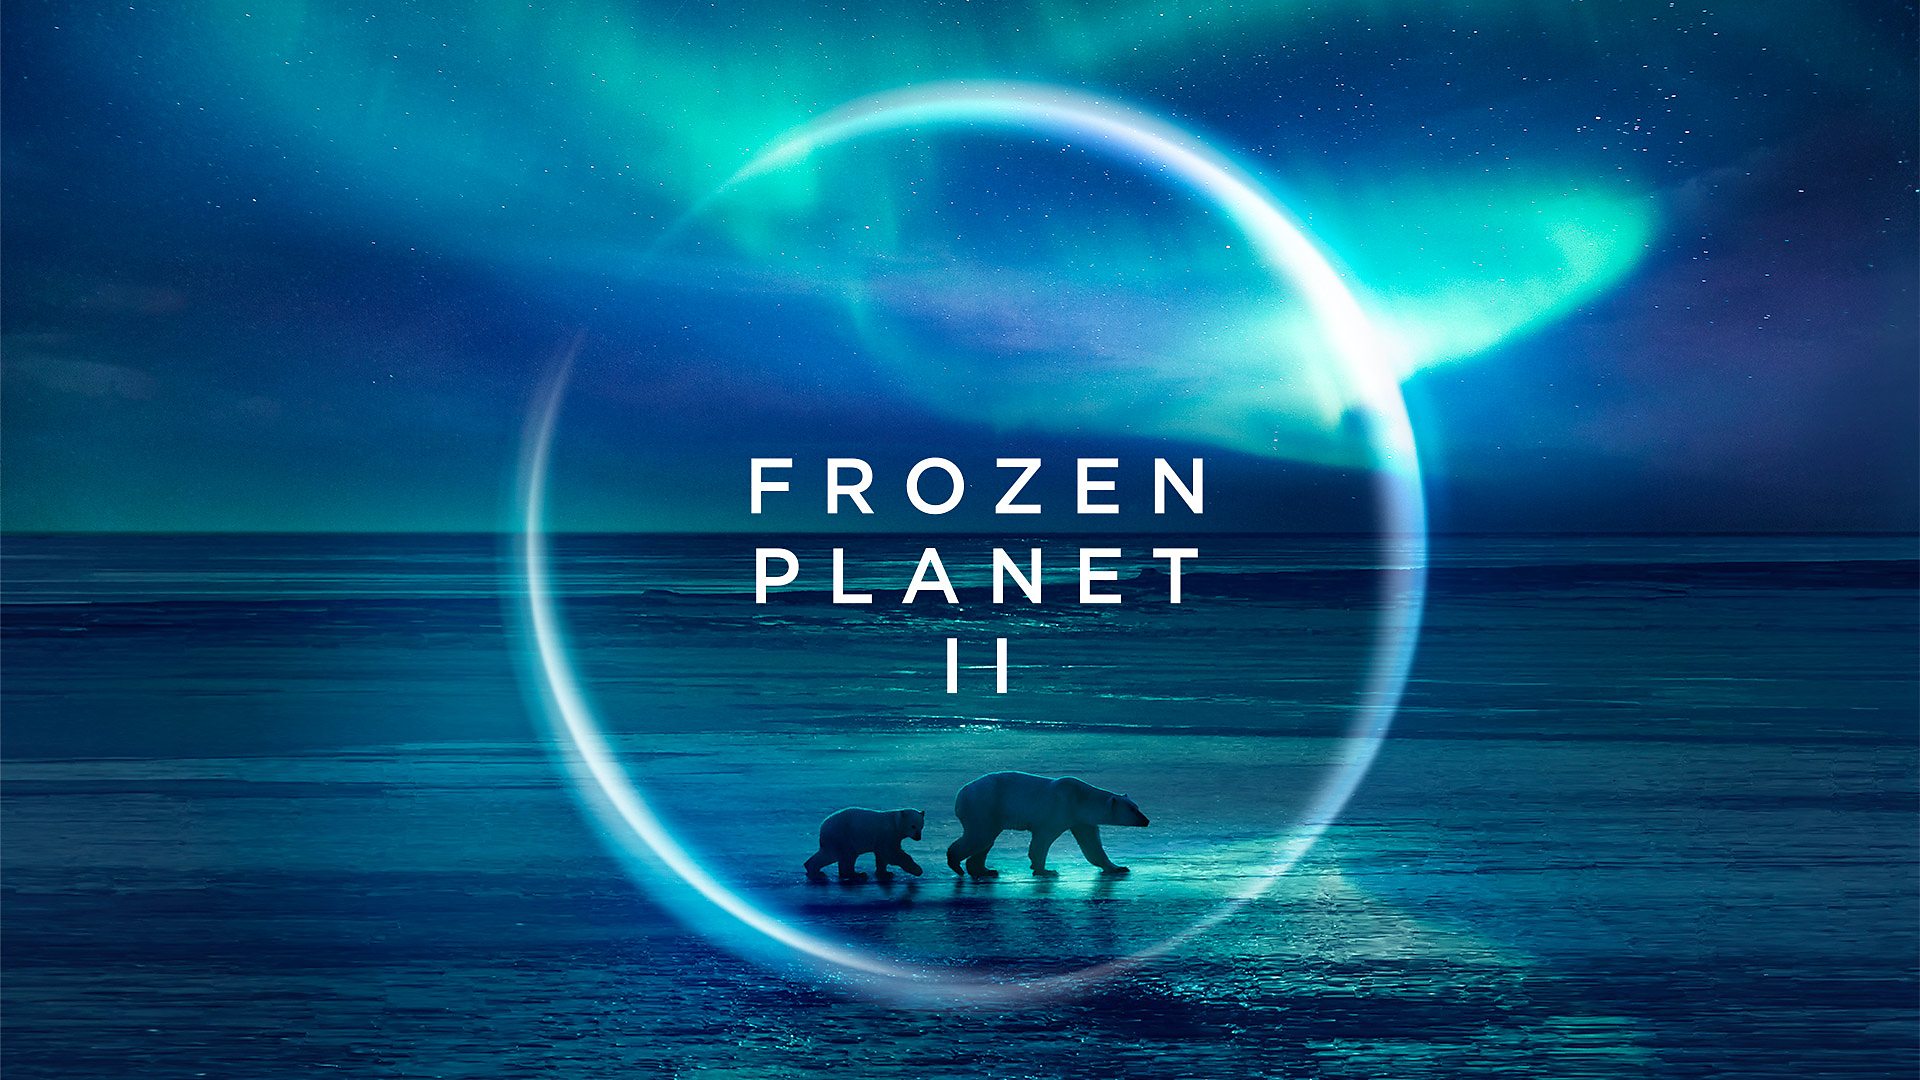 How to watch Frozen Planet 2: stream online from anywhere in the world |  Live Science